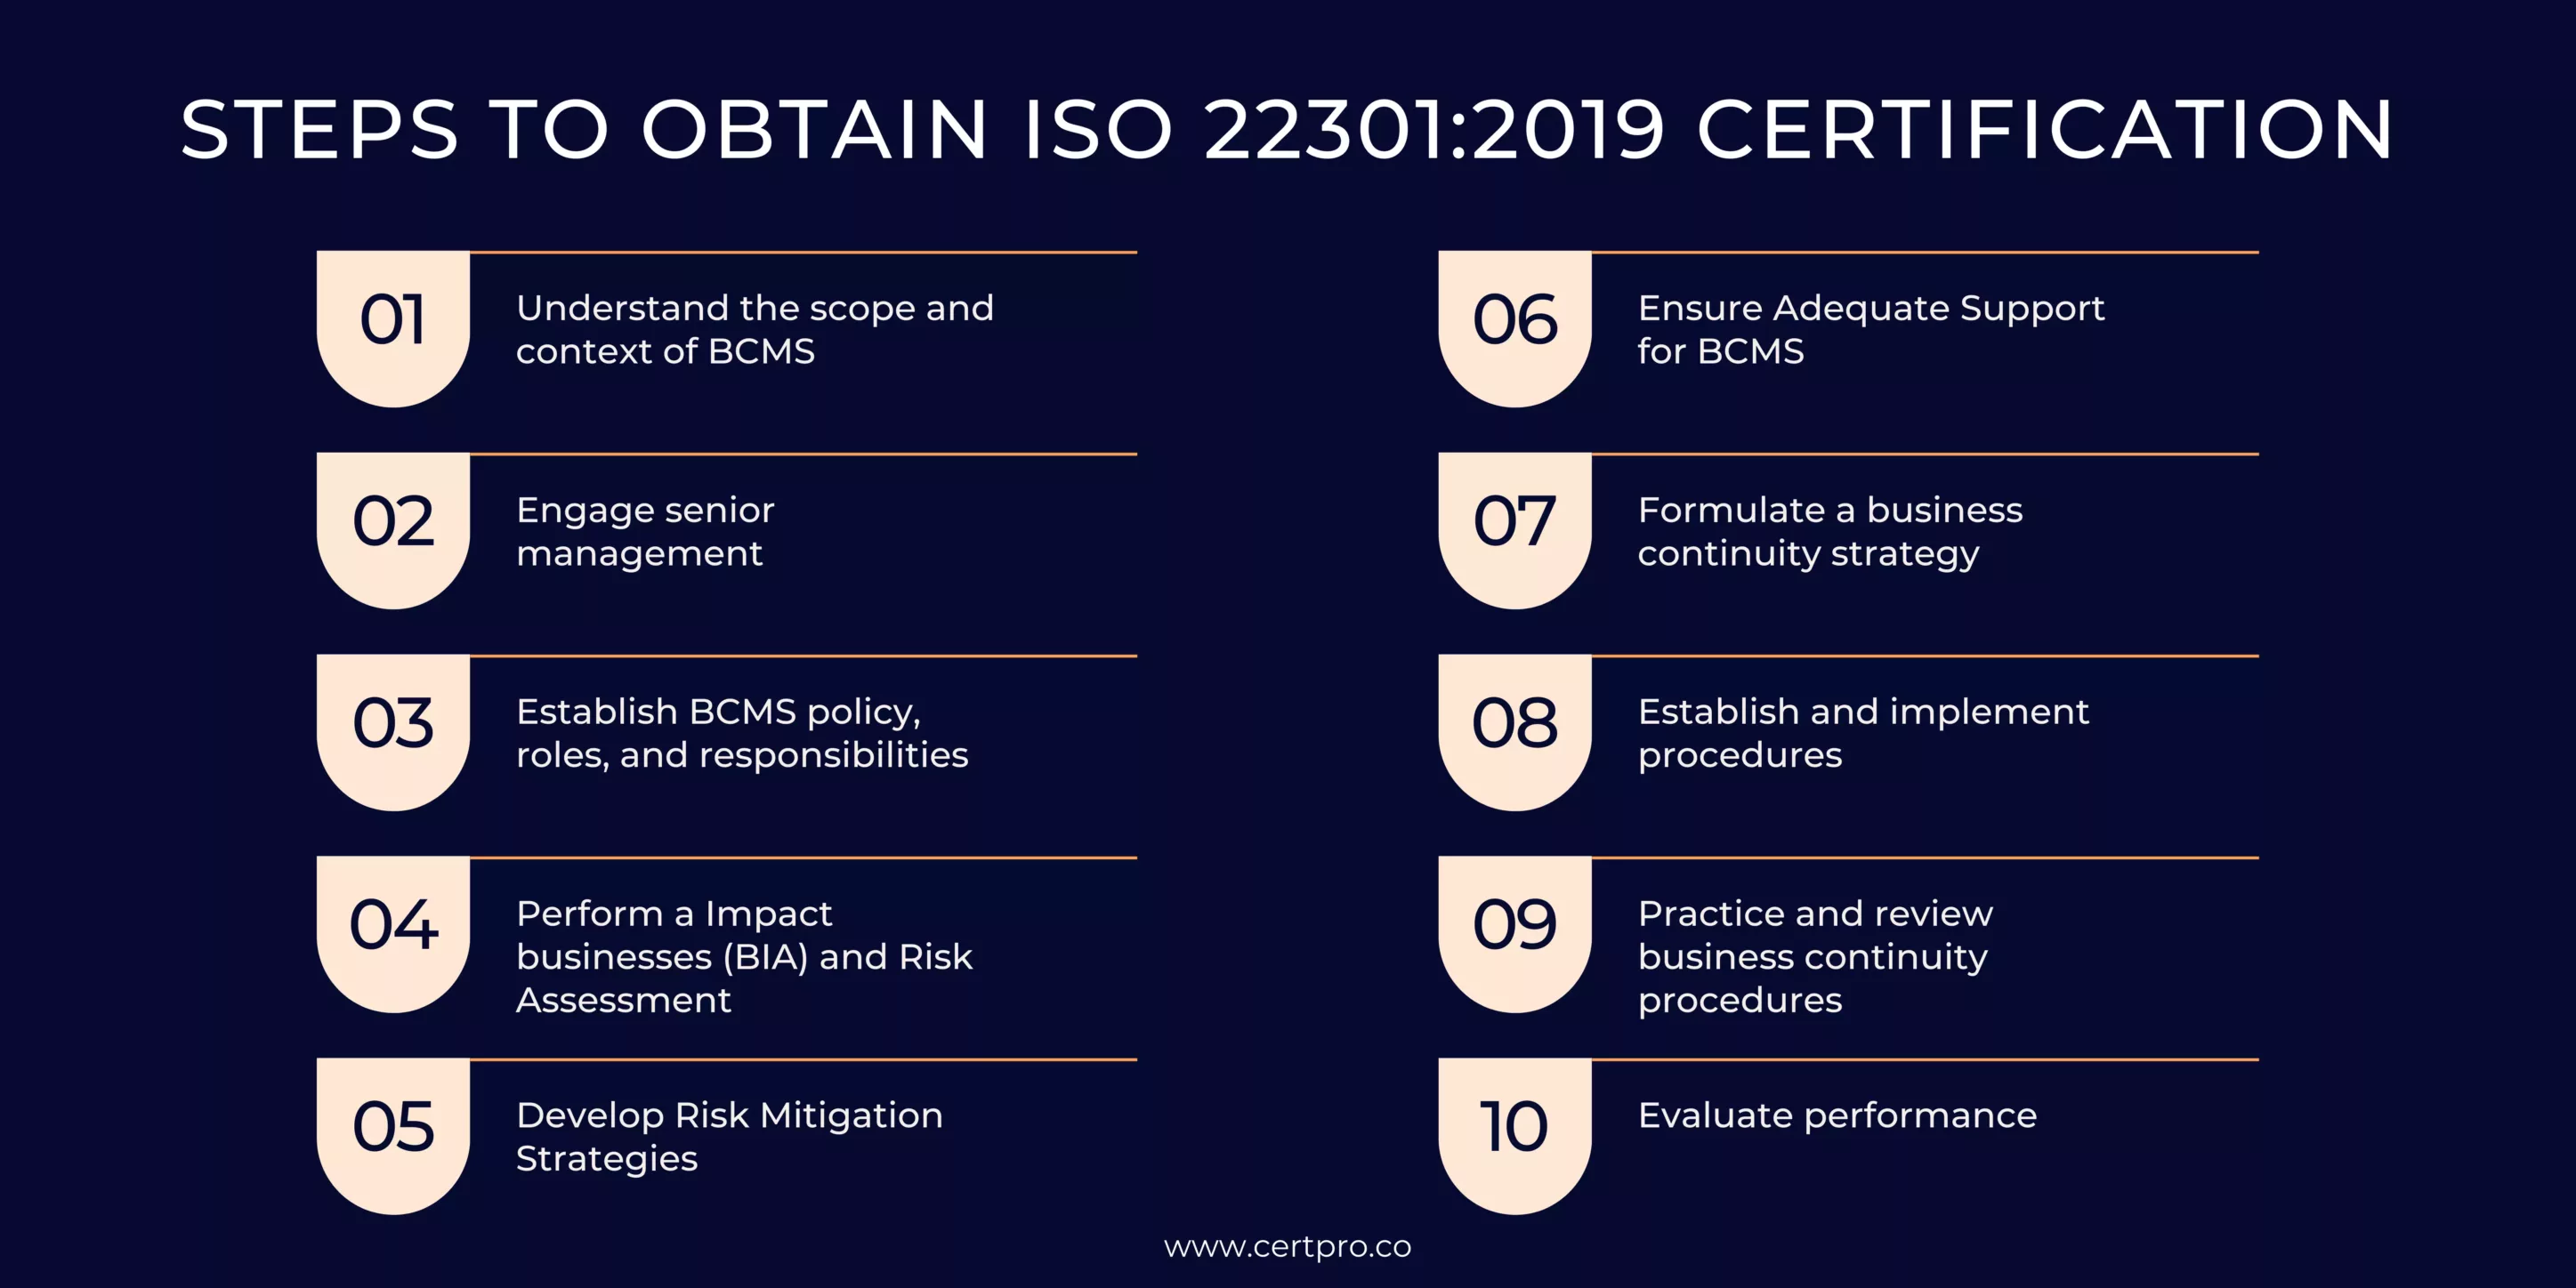 STEPS TO OBTAIN ISO 22301